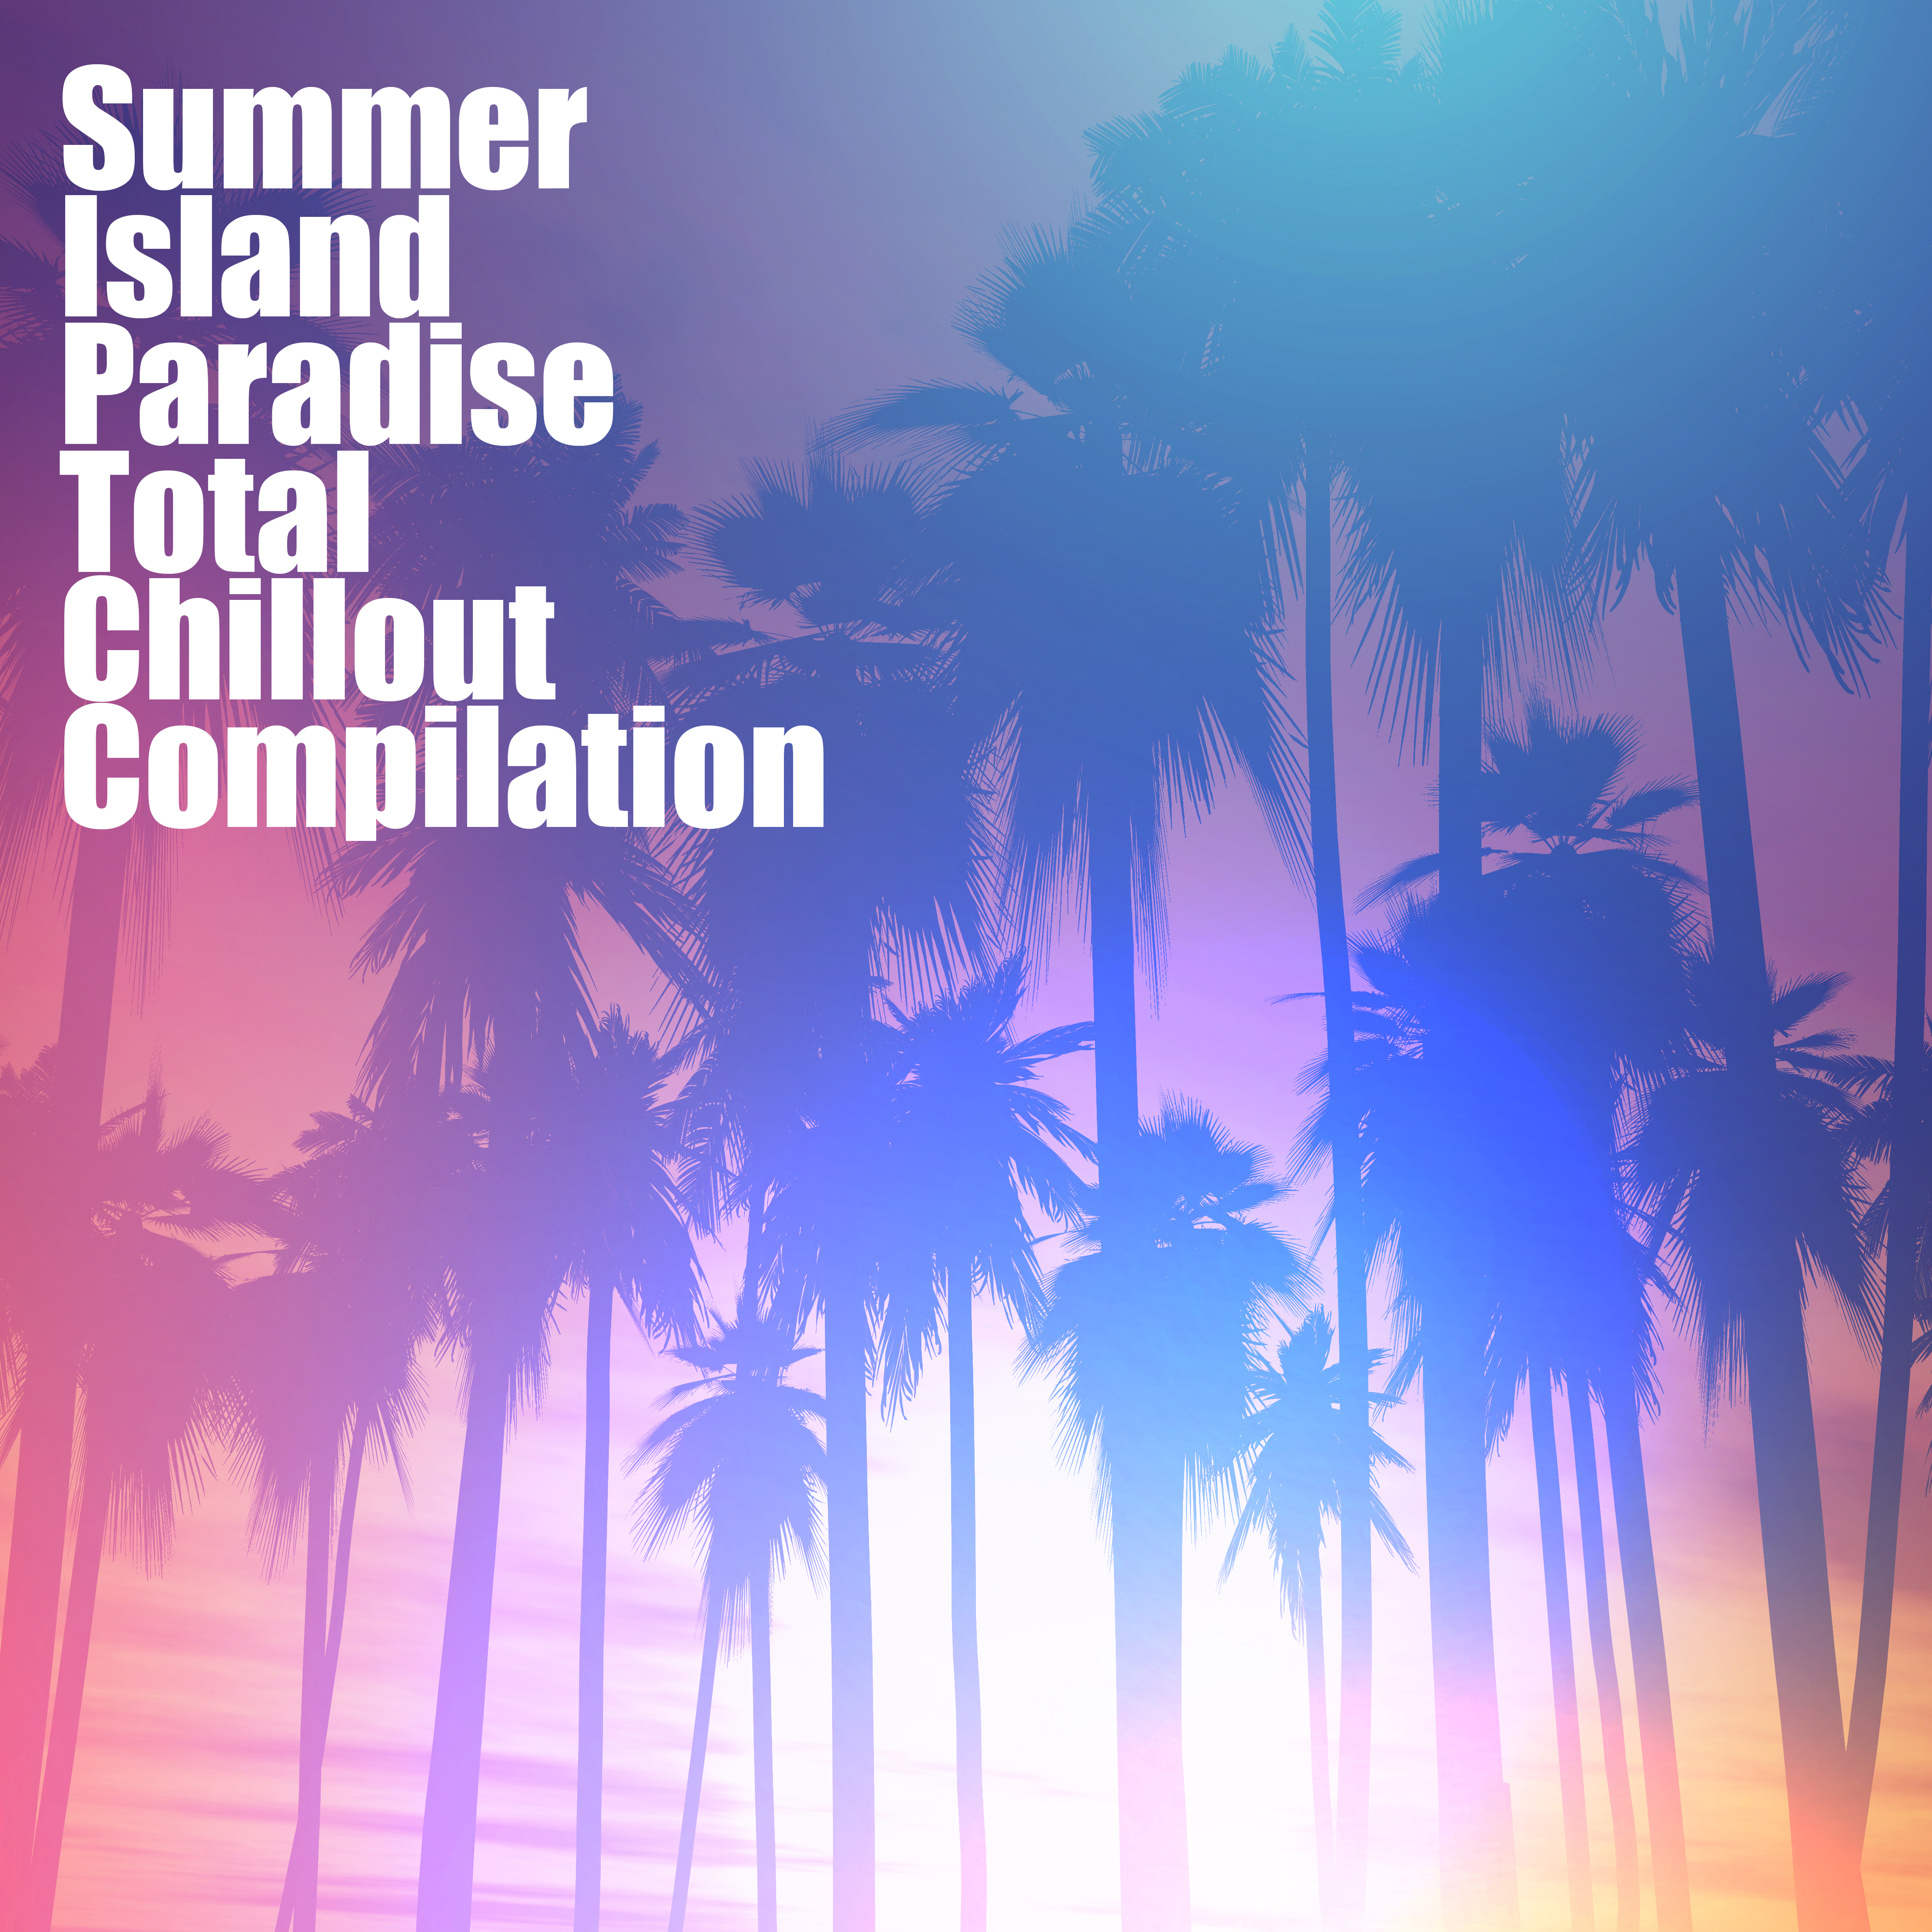 Summer Island Paradise Total Chillout Compilation